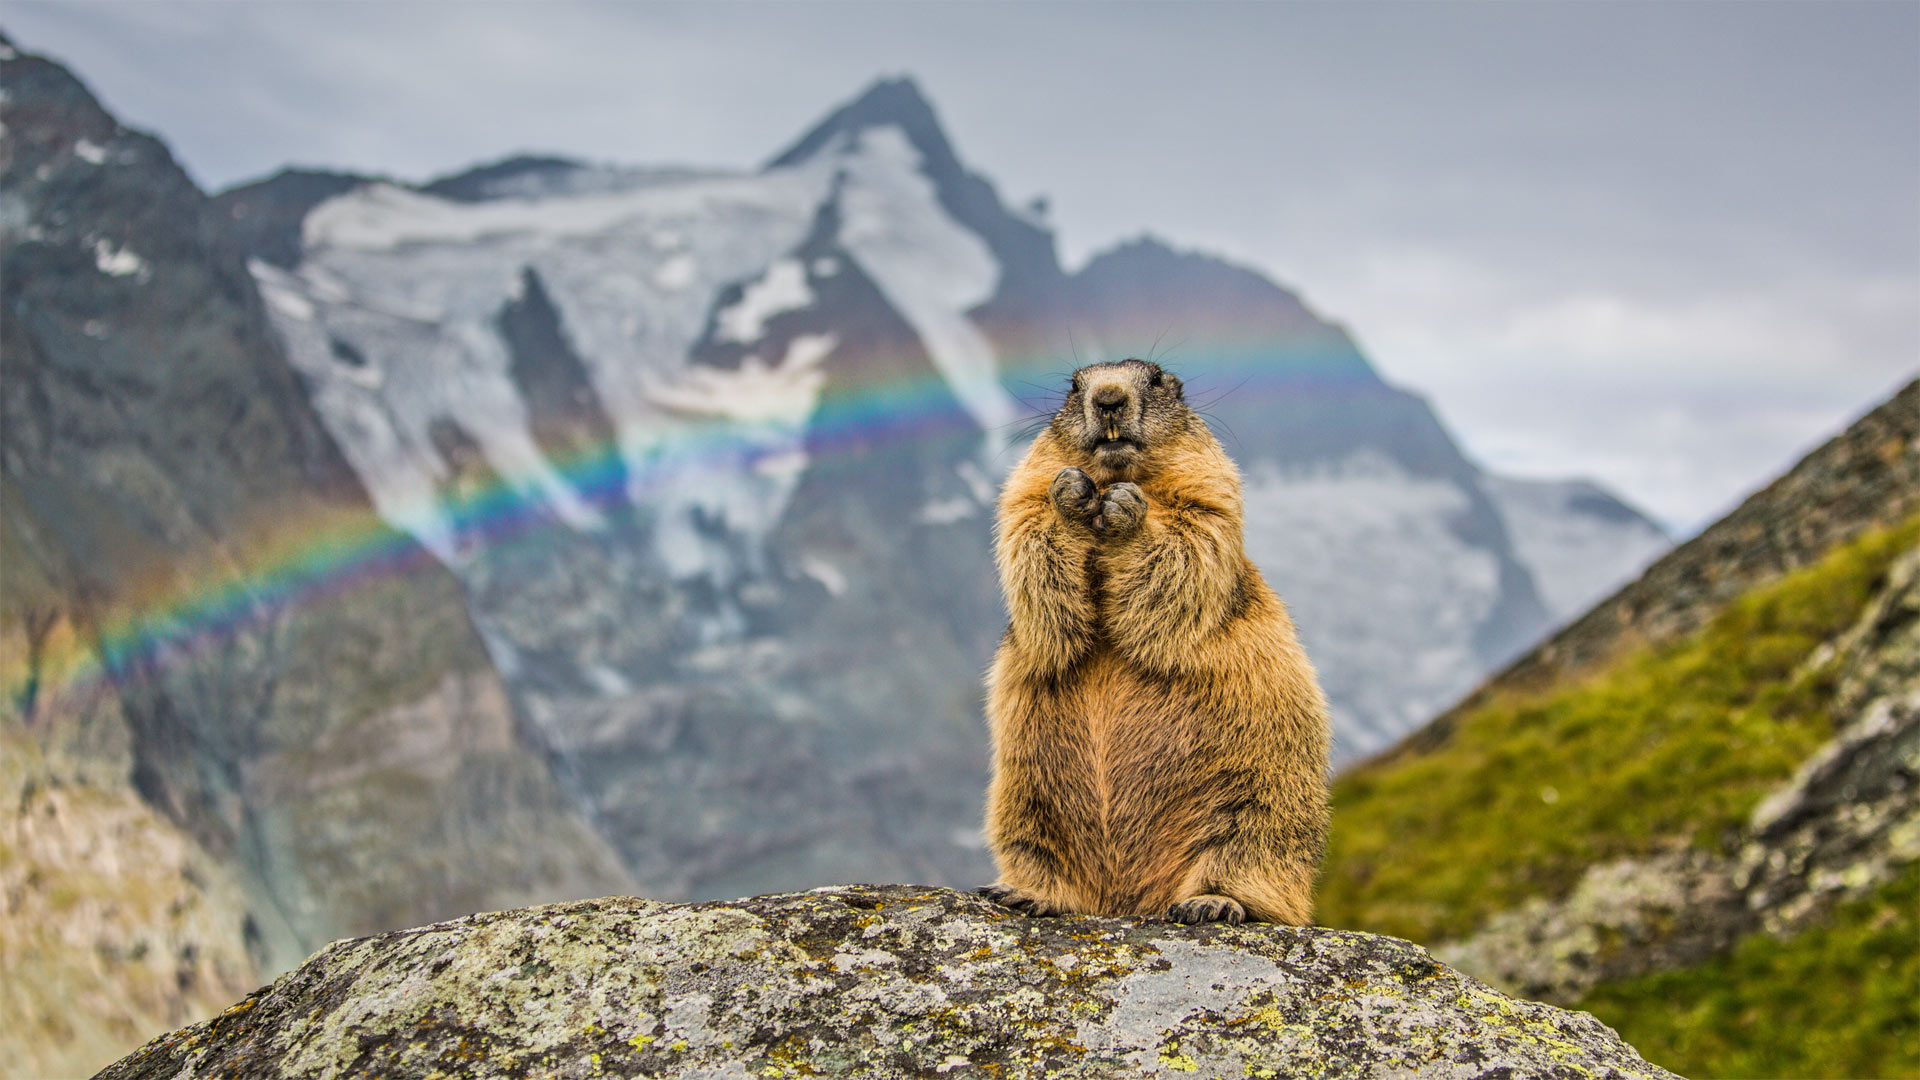 Marmot with the peak of Grossglockner in the background, Austria - SeppFriedhuber/Getty Images)